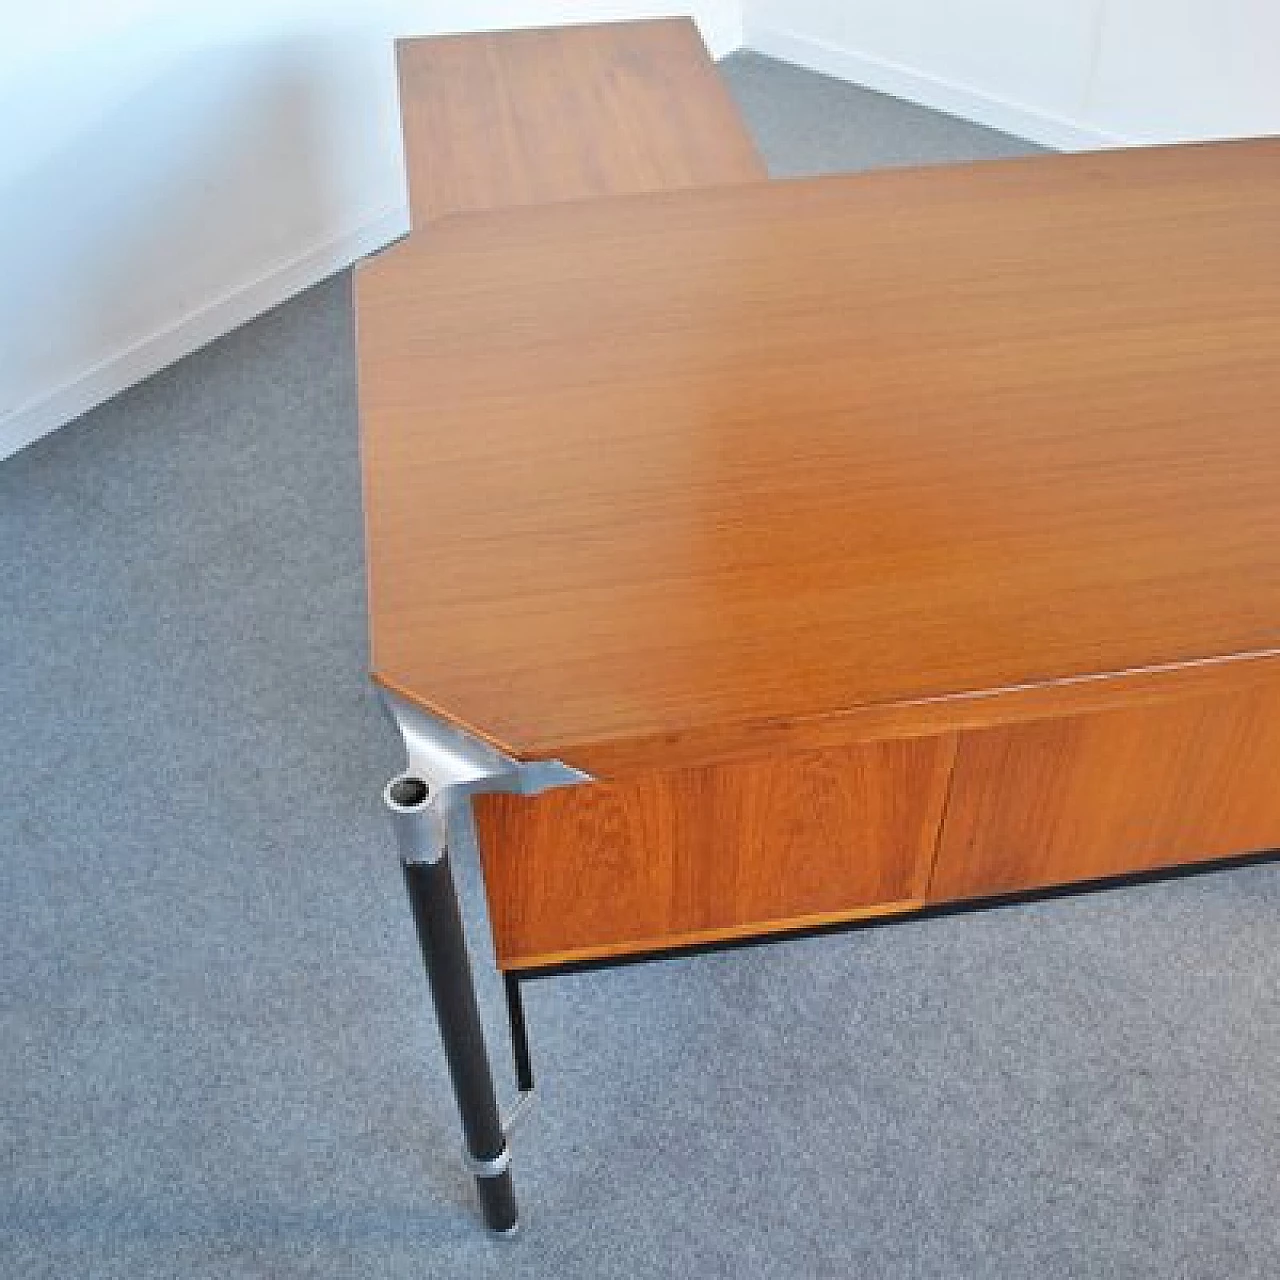 Executive desk by Ico Parisi for MIM Rome, 1950s 1452505